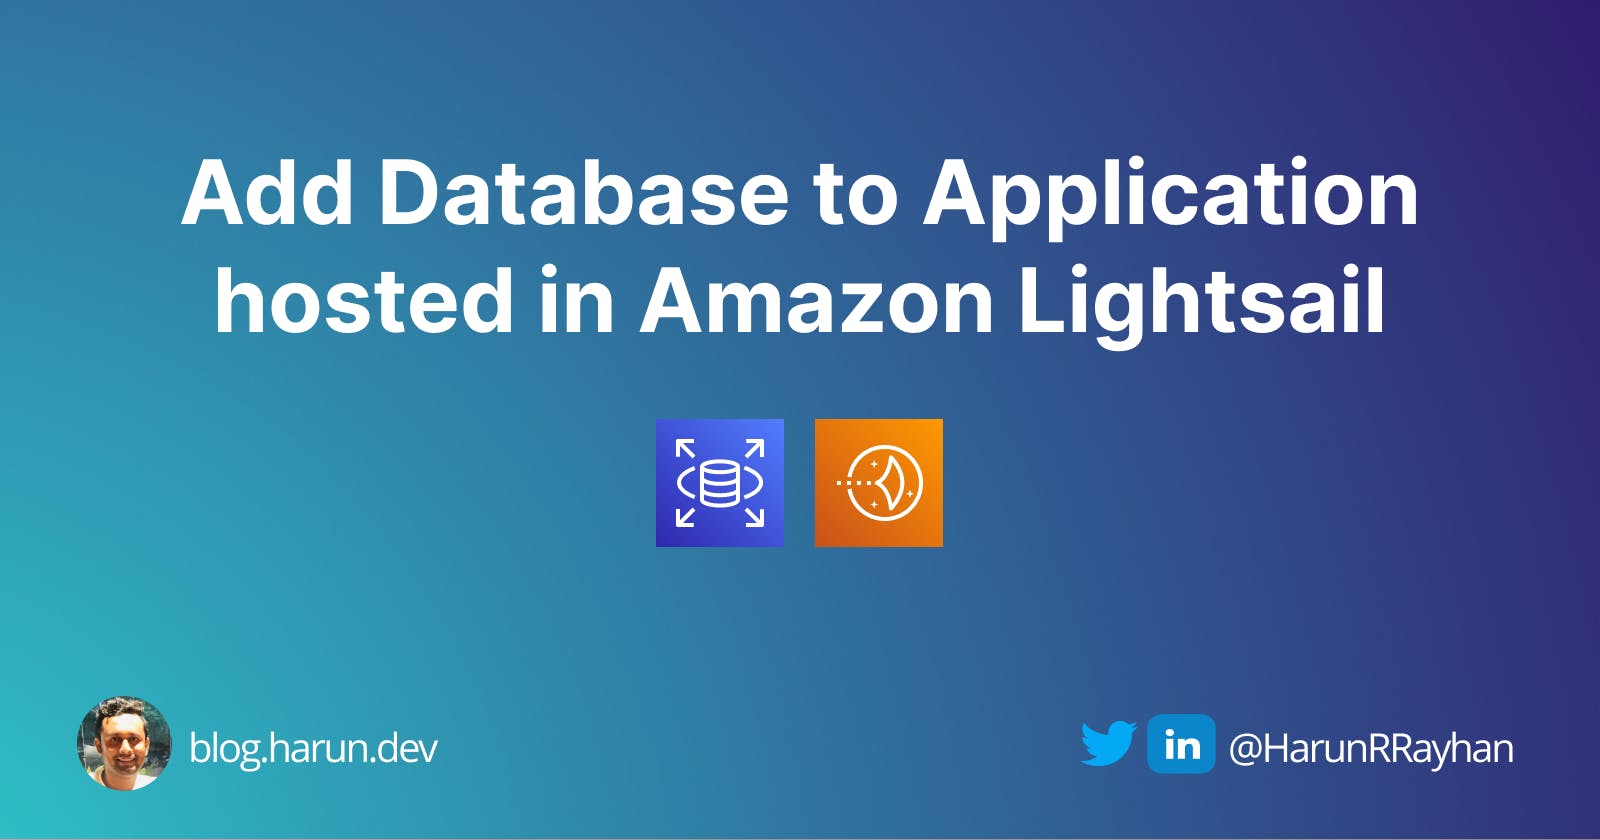 Add Database to Application hosted in Amazon Lightsail